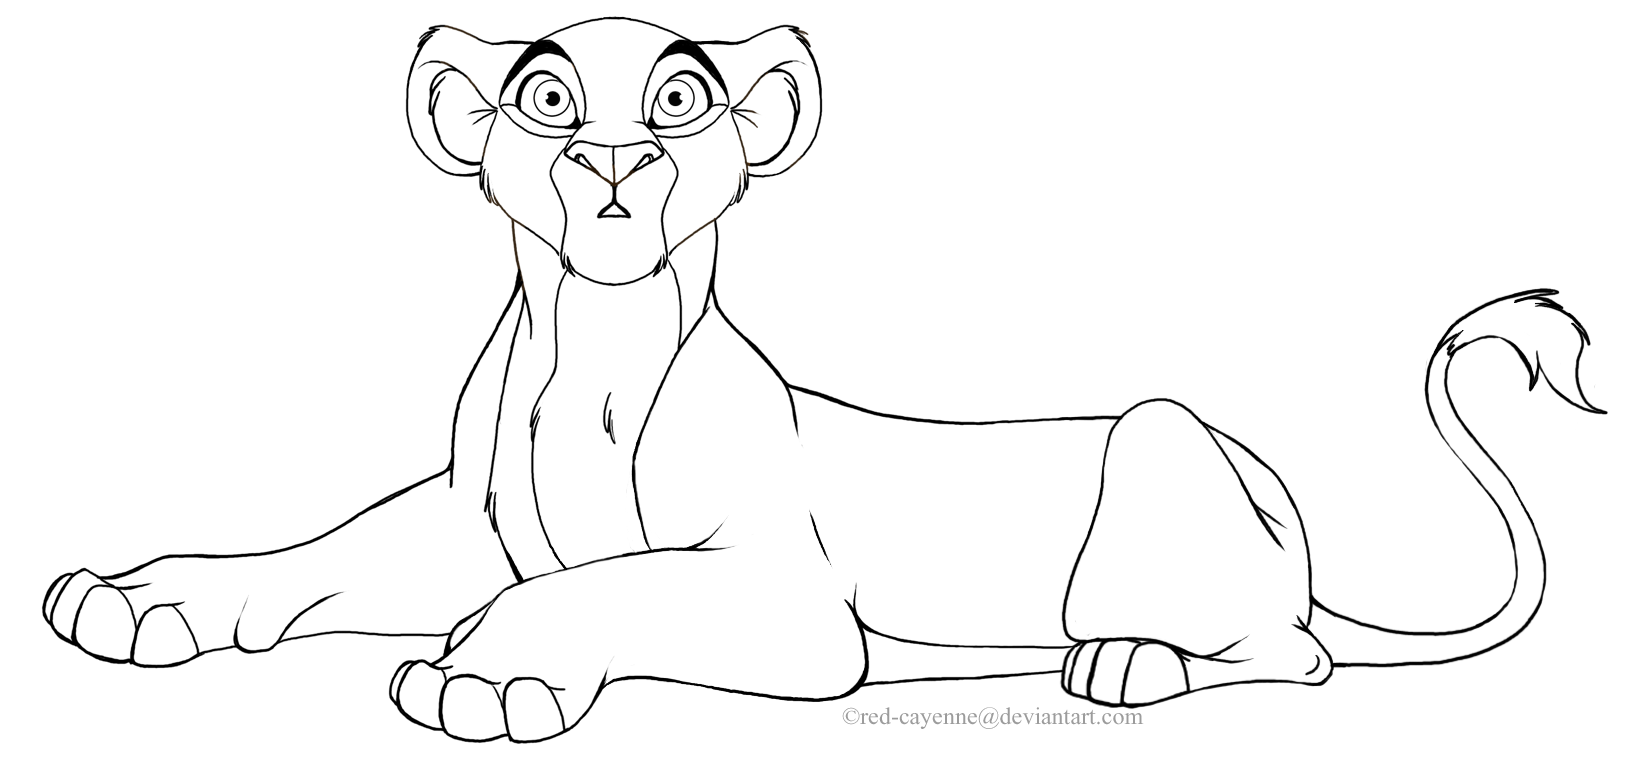 Lioness Coloring Pages at GetColorings.com | Free printable colorings